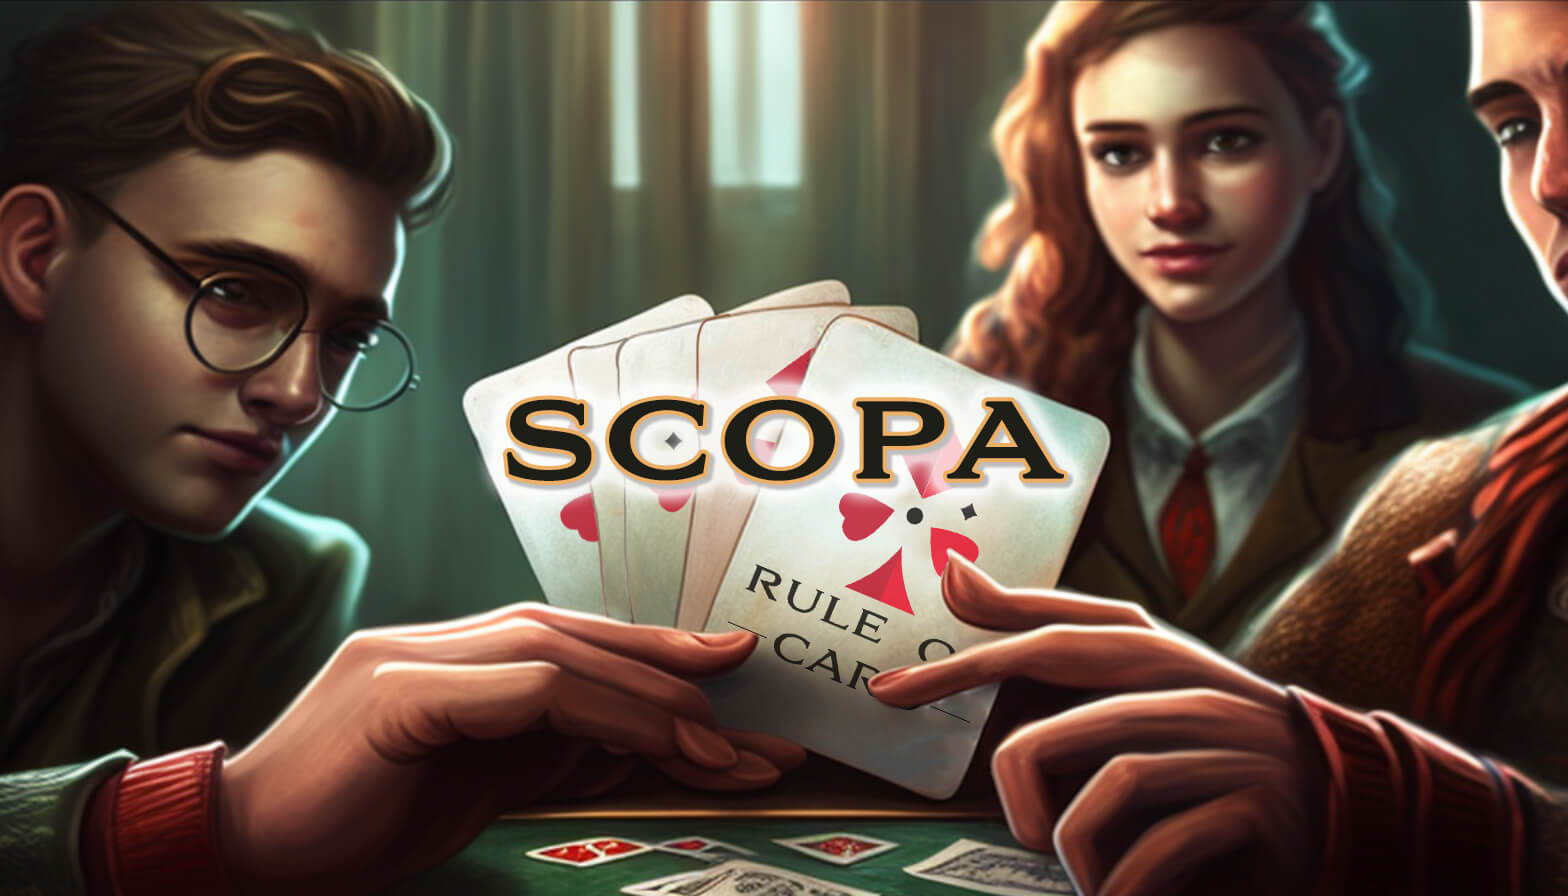 Playing the card game Scopa